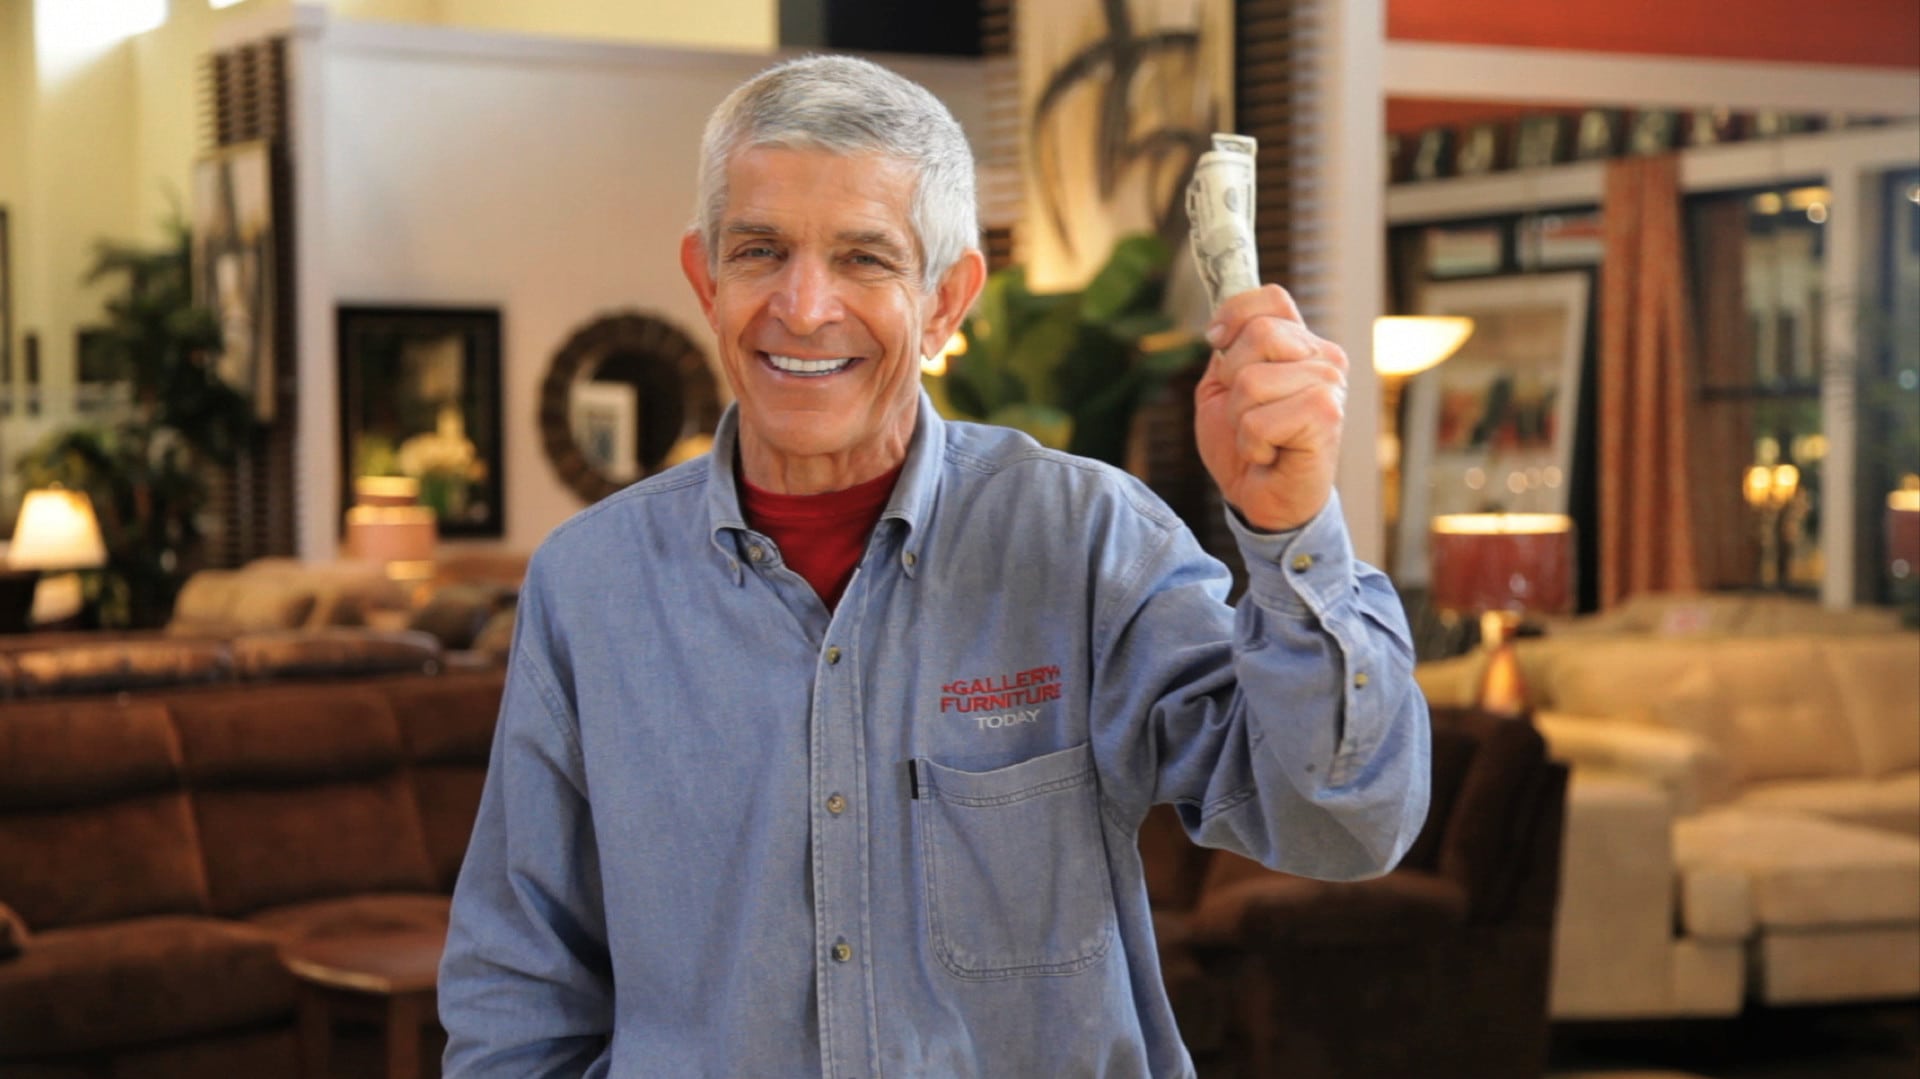 Mattress Mack: Multi-Millionaire Entrepreneur Warms Hearts and Hundreds of  Texans in the Snowpocalypse 